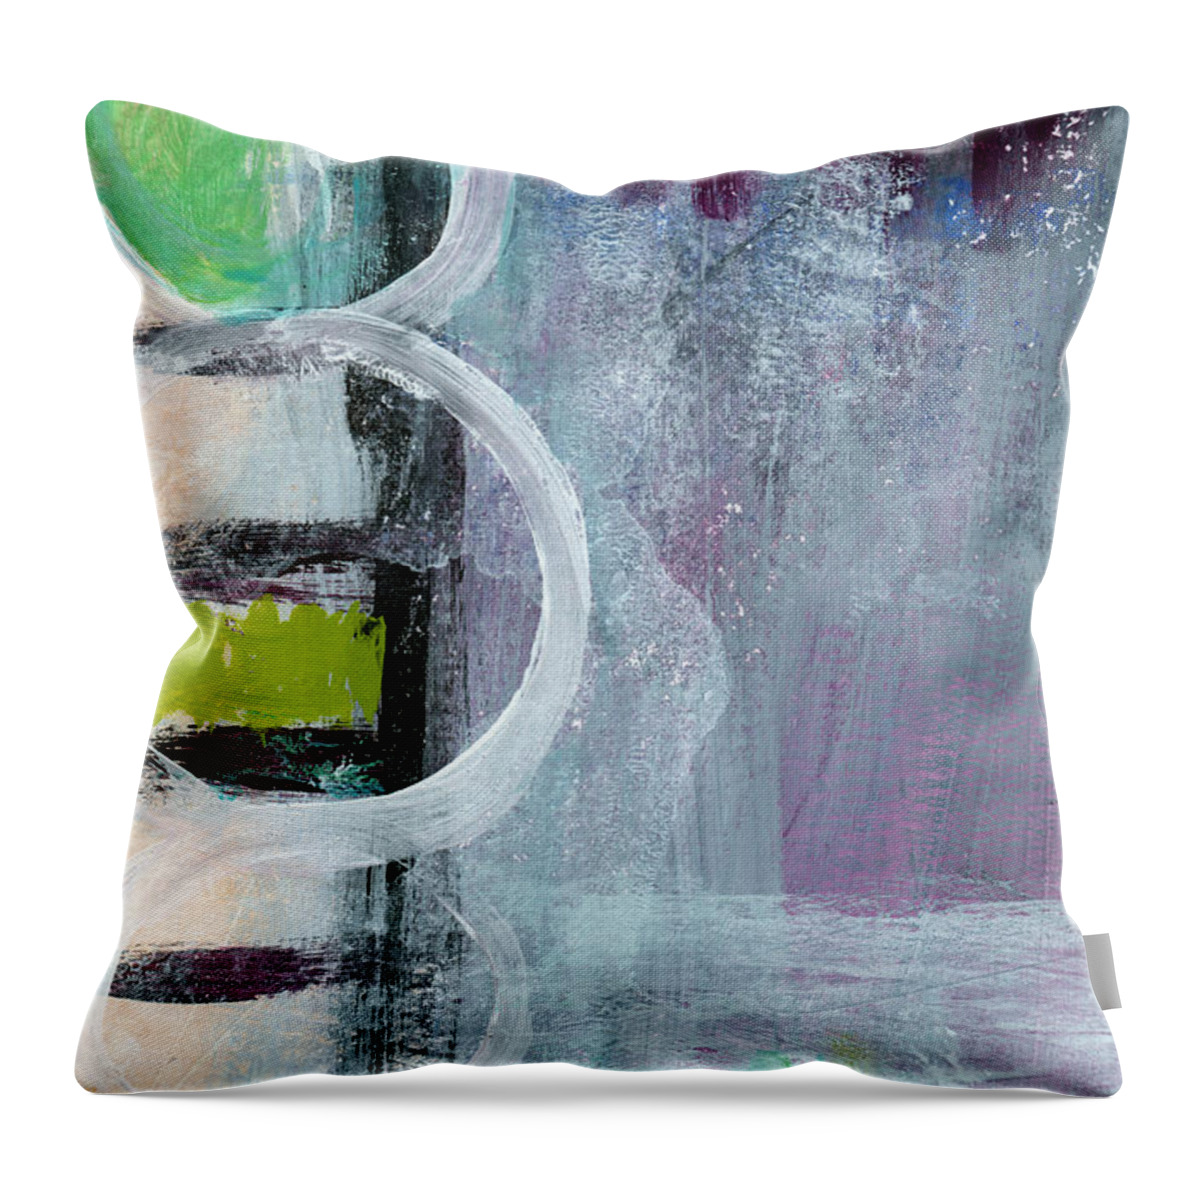 Purple Abstract Throw Pillow featuring the painting Junction- Abstract Expressionist Art by Linda Woods